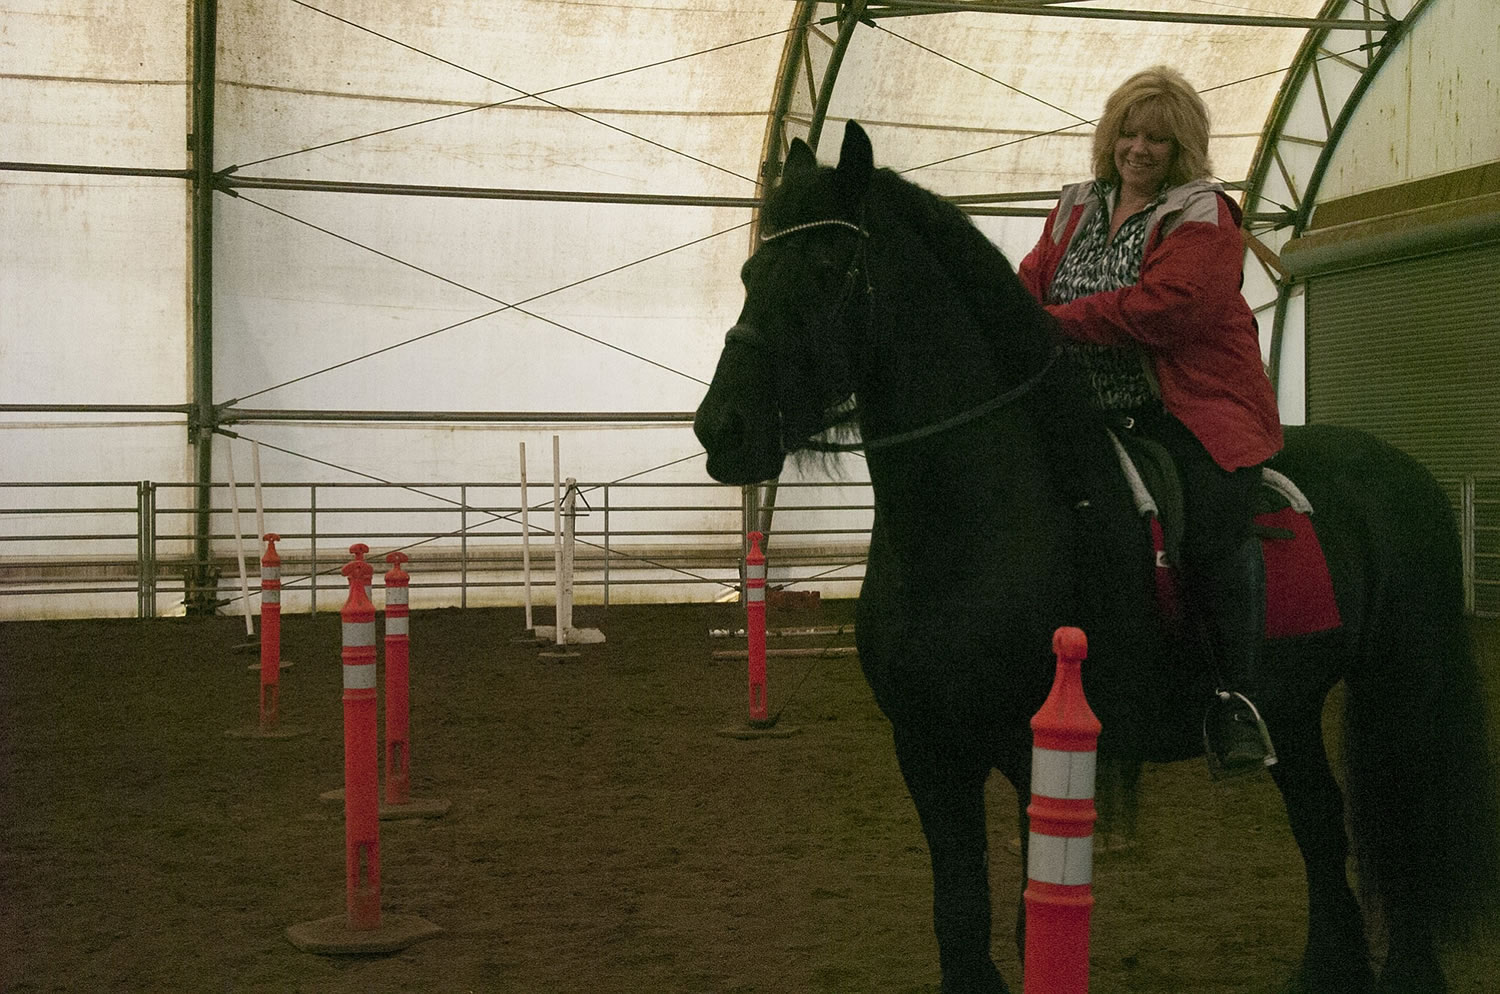 Susan McIntosh practices for the working equitation competition at Rob Zimmerman's South Ridge Farms ranch in Ridgefield.